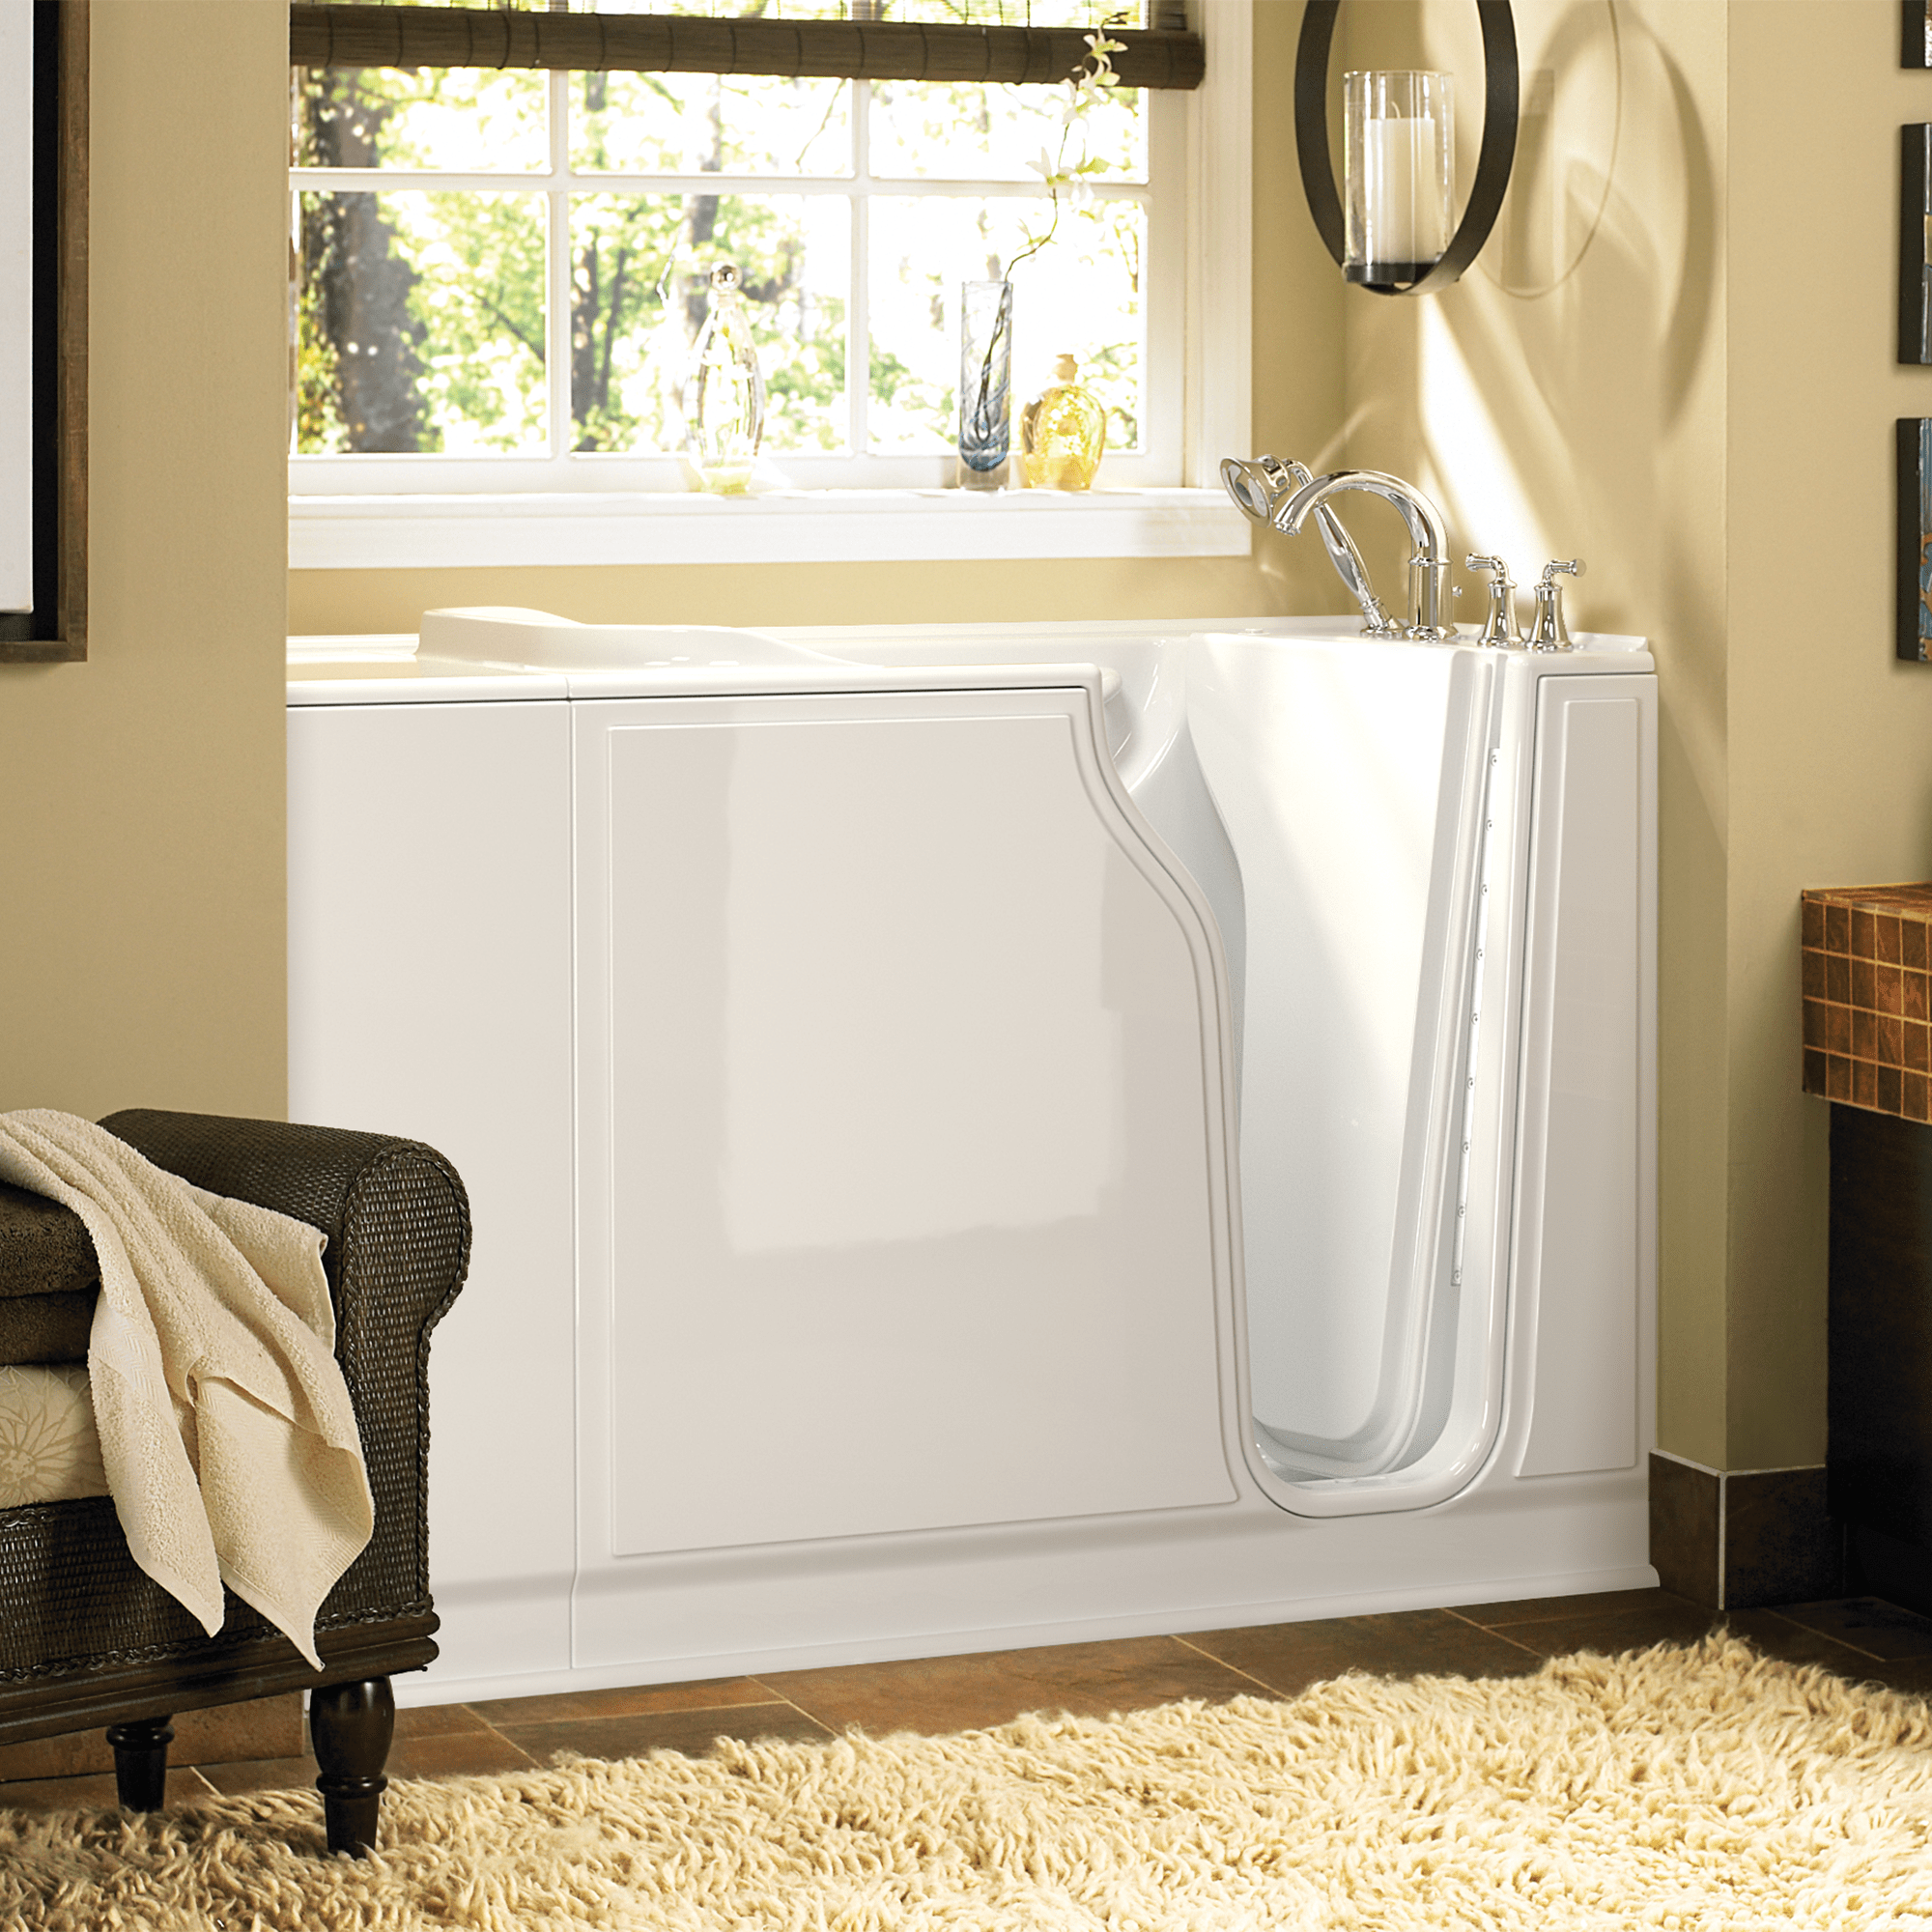 Gelcoat Value Series 30 x 52  Inch Walk in Tub With Whirlpool System   Right Hand Drain With Faucet WIB WHITE